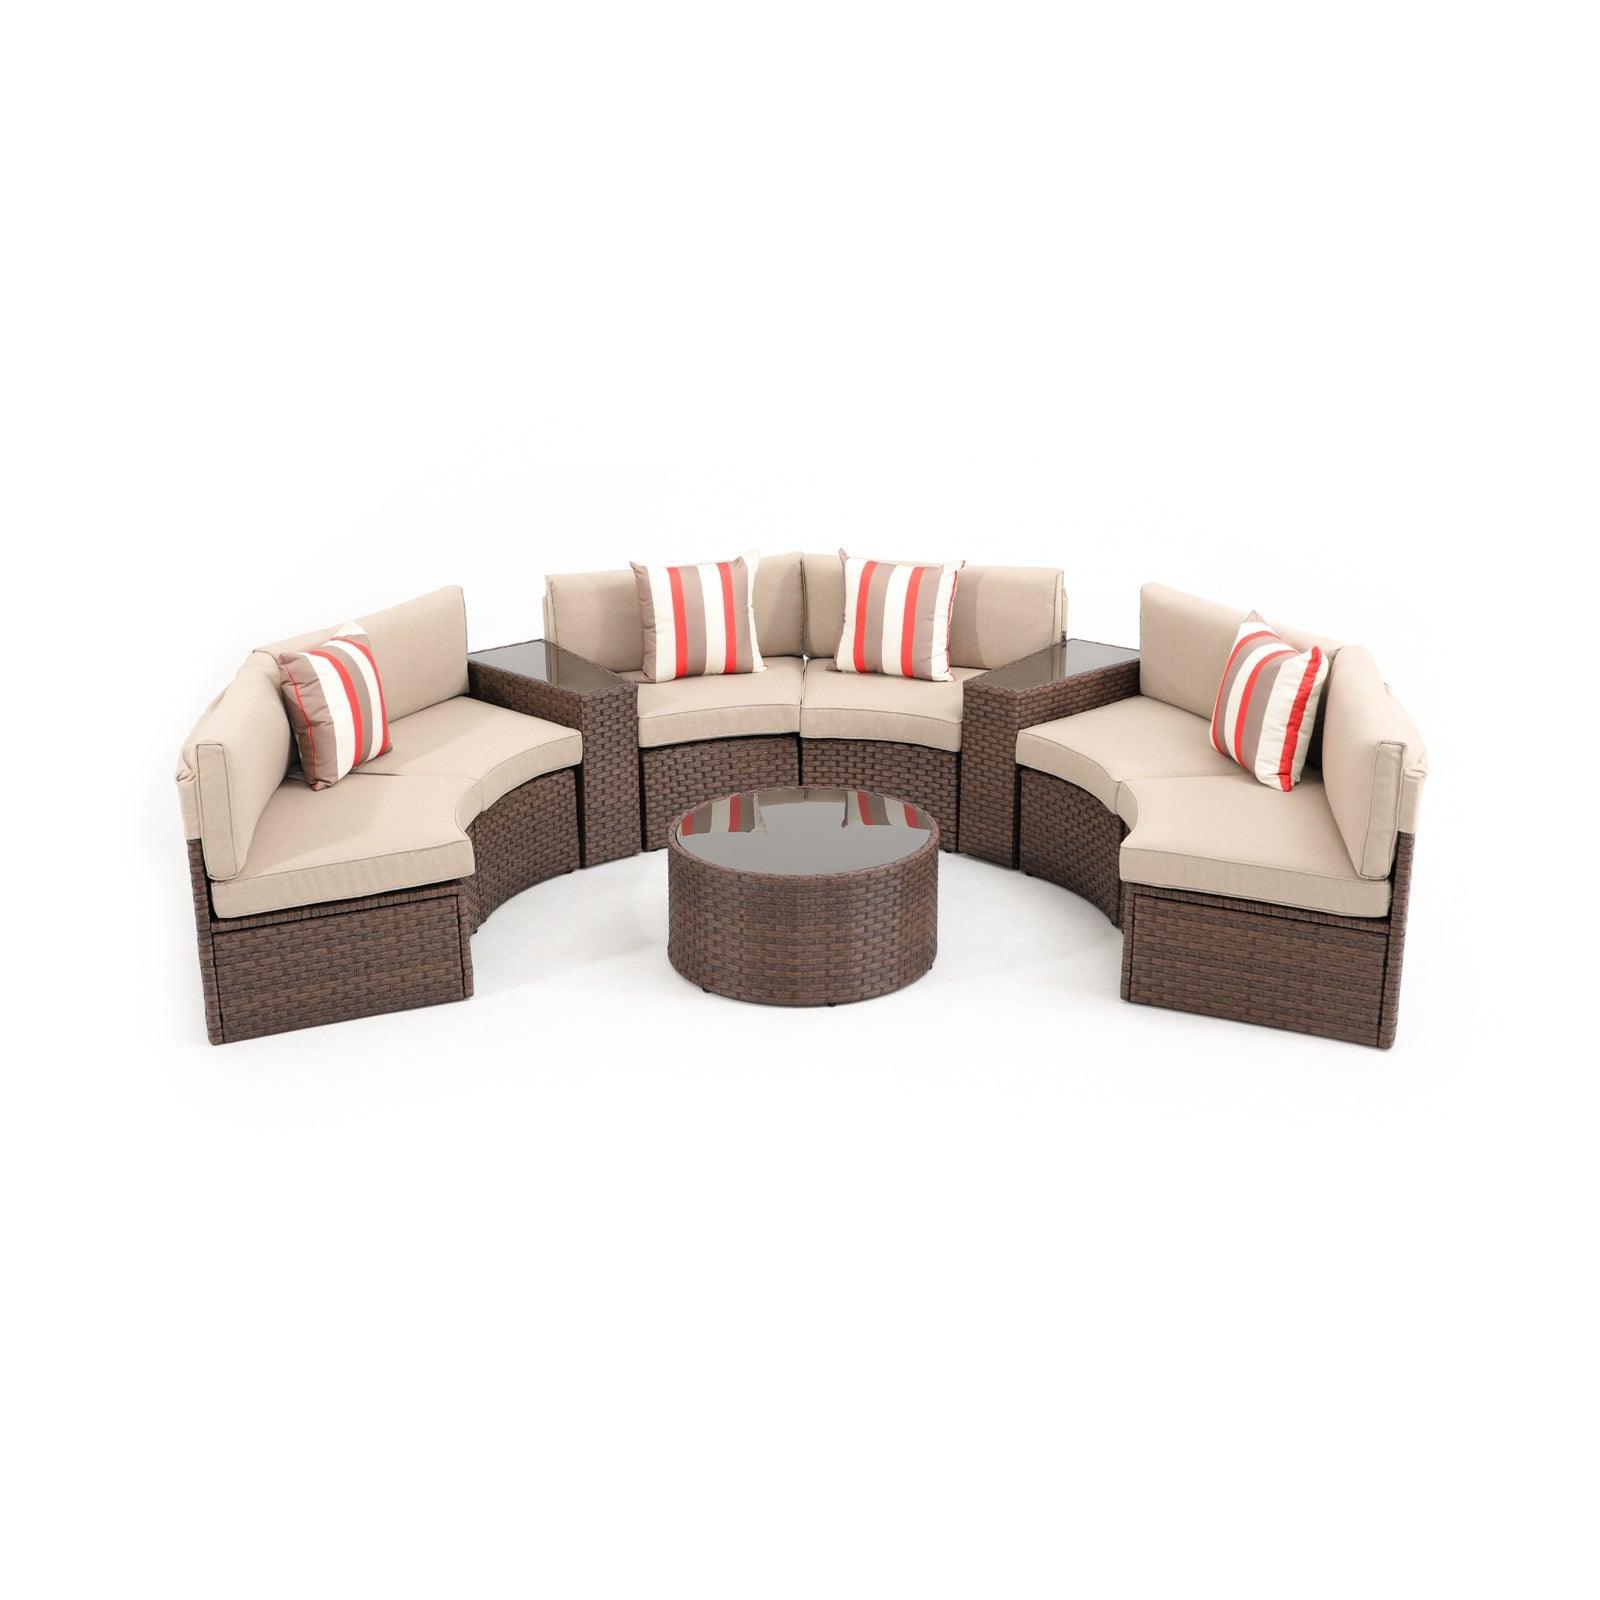 Boboli 9-piece Brown Wicker Curved Sectional Set with beige cushions, 1 Round Glass Coffee Table + 2 glass top side tables + 6 sectional sofas, front - Jardina Furniture #color_Brown #piece_11-pc.